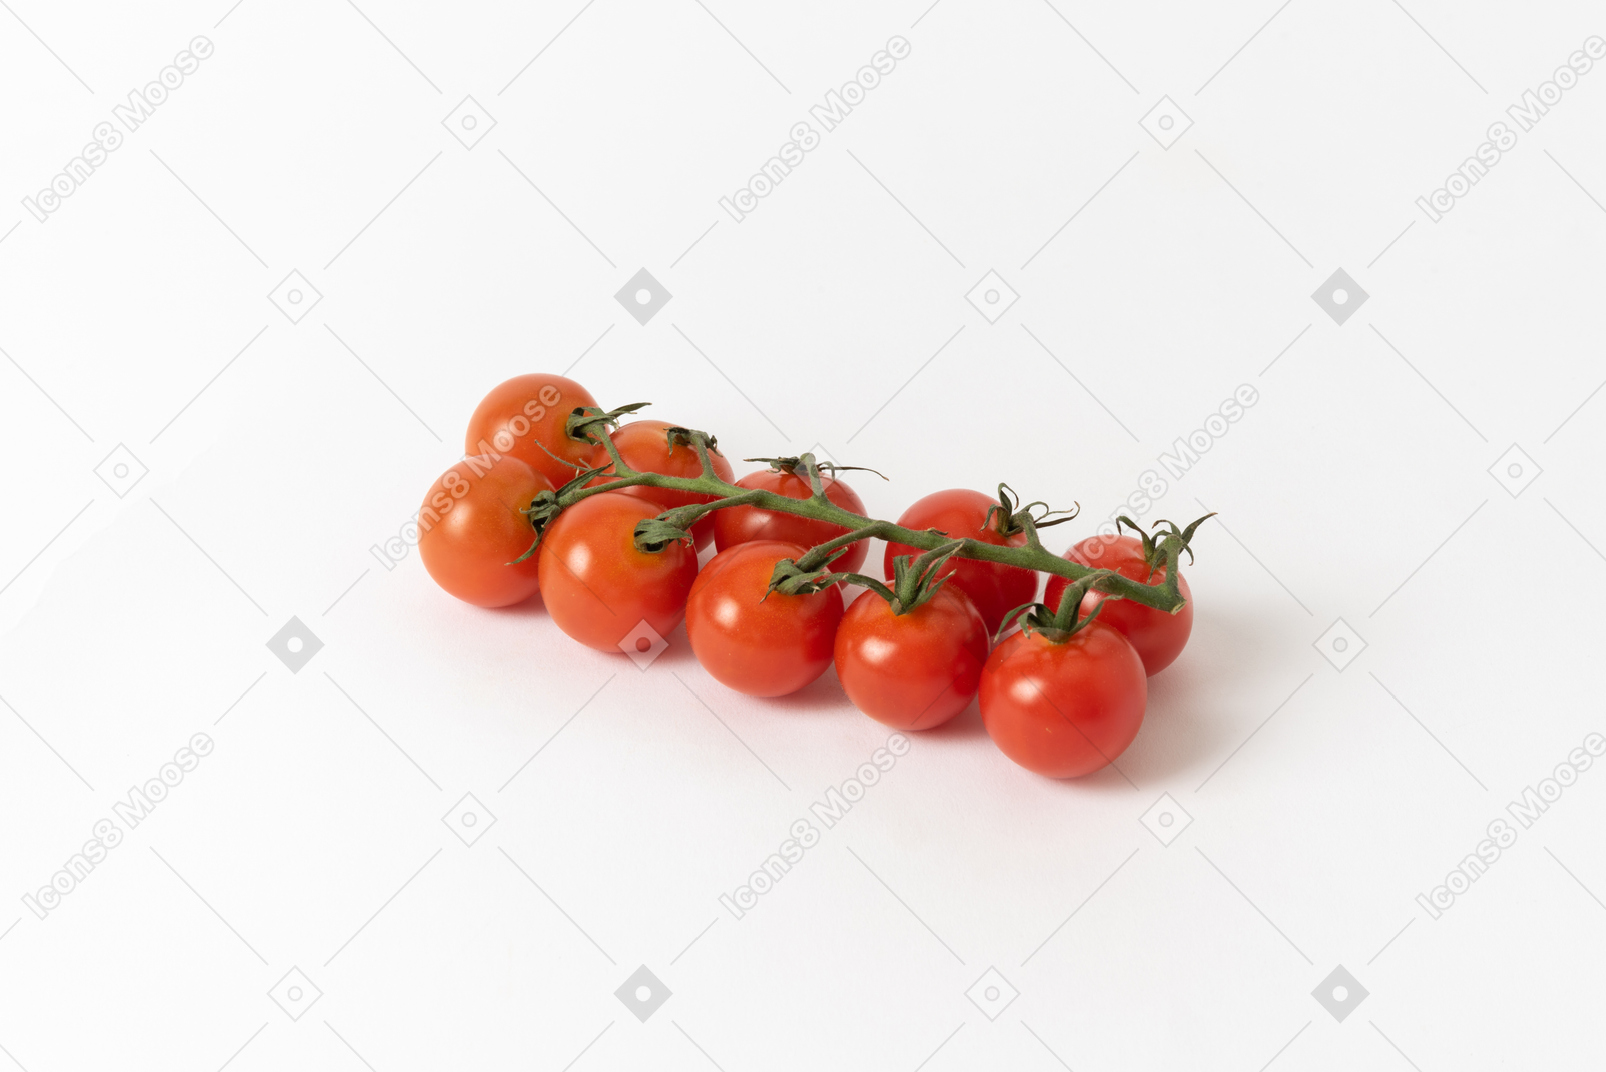 A branch of cherry tomatoes